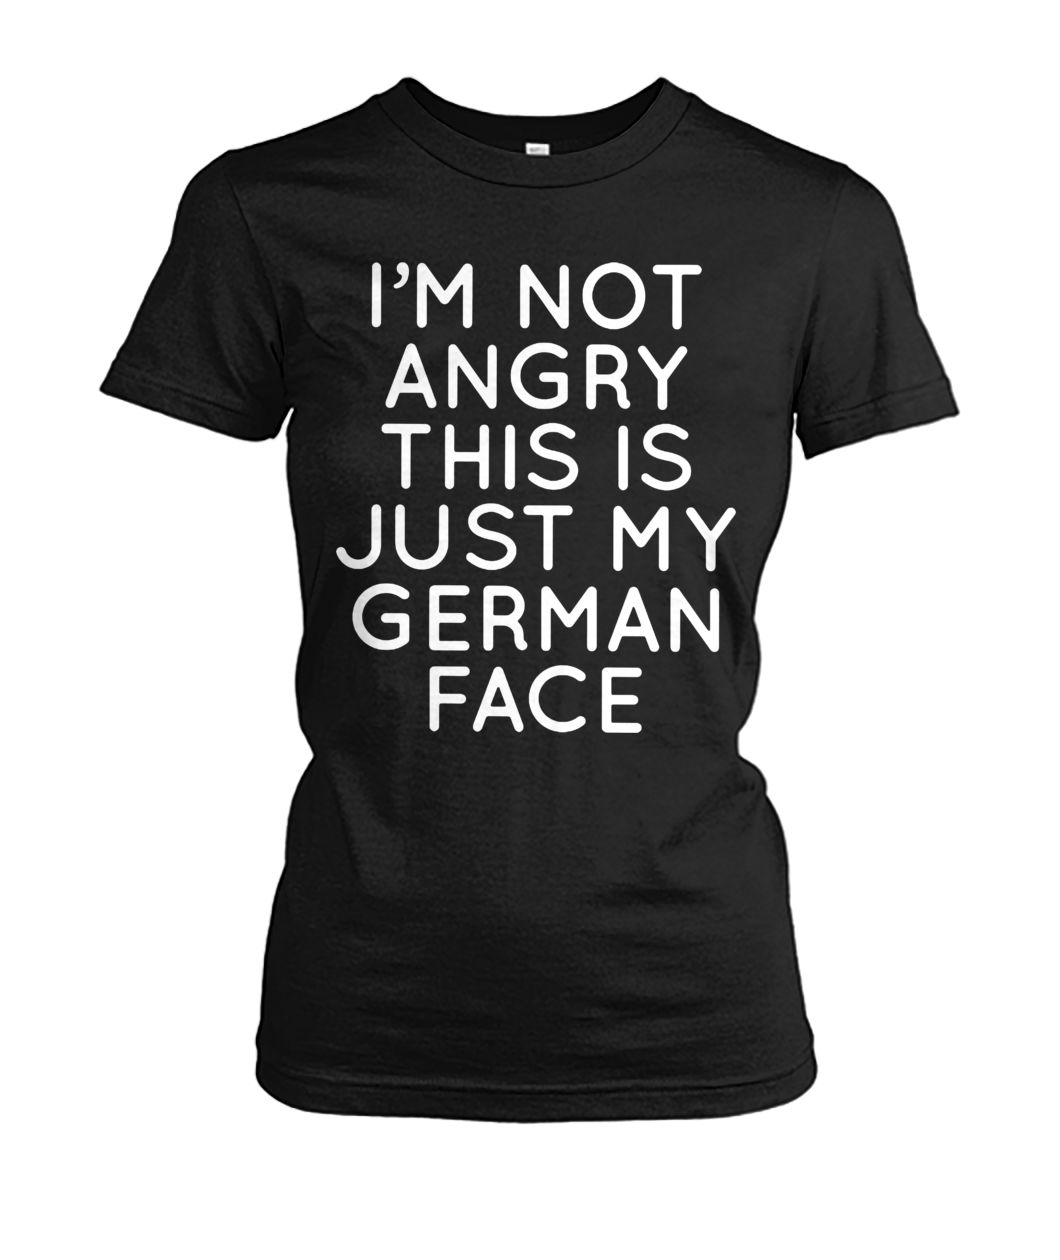 I'm not angry this is just my german face women's crew tee